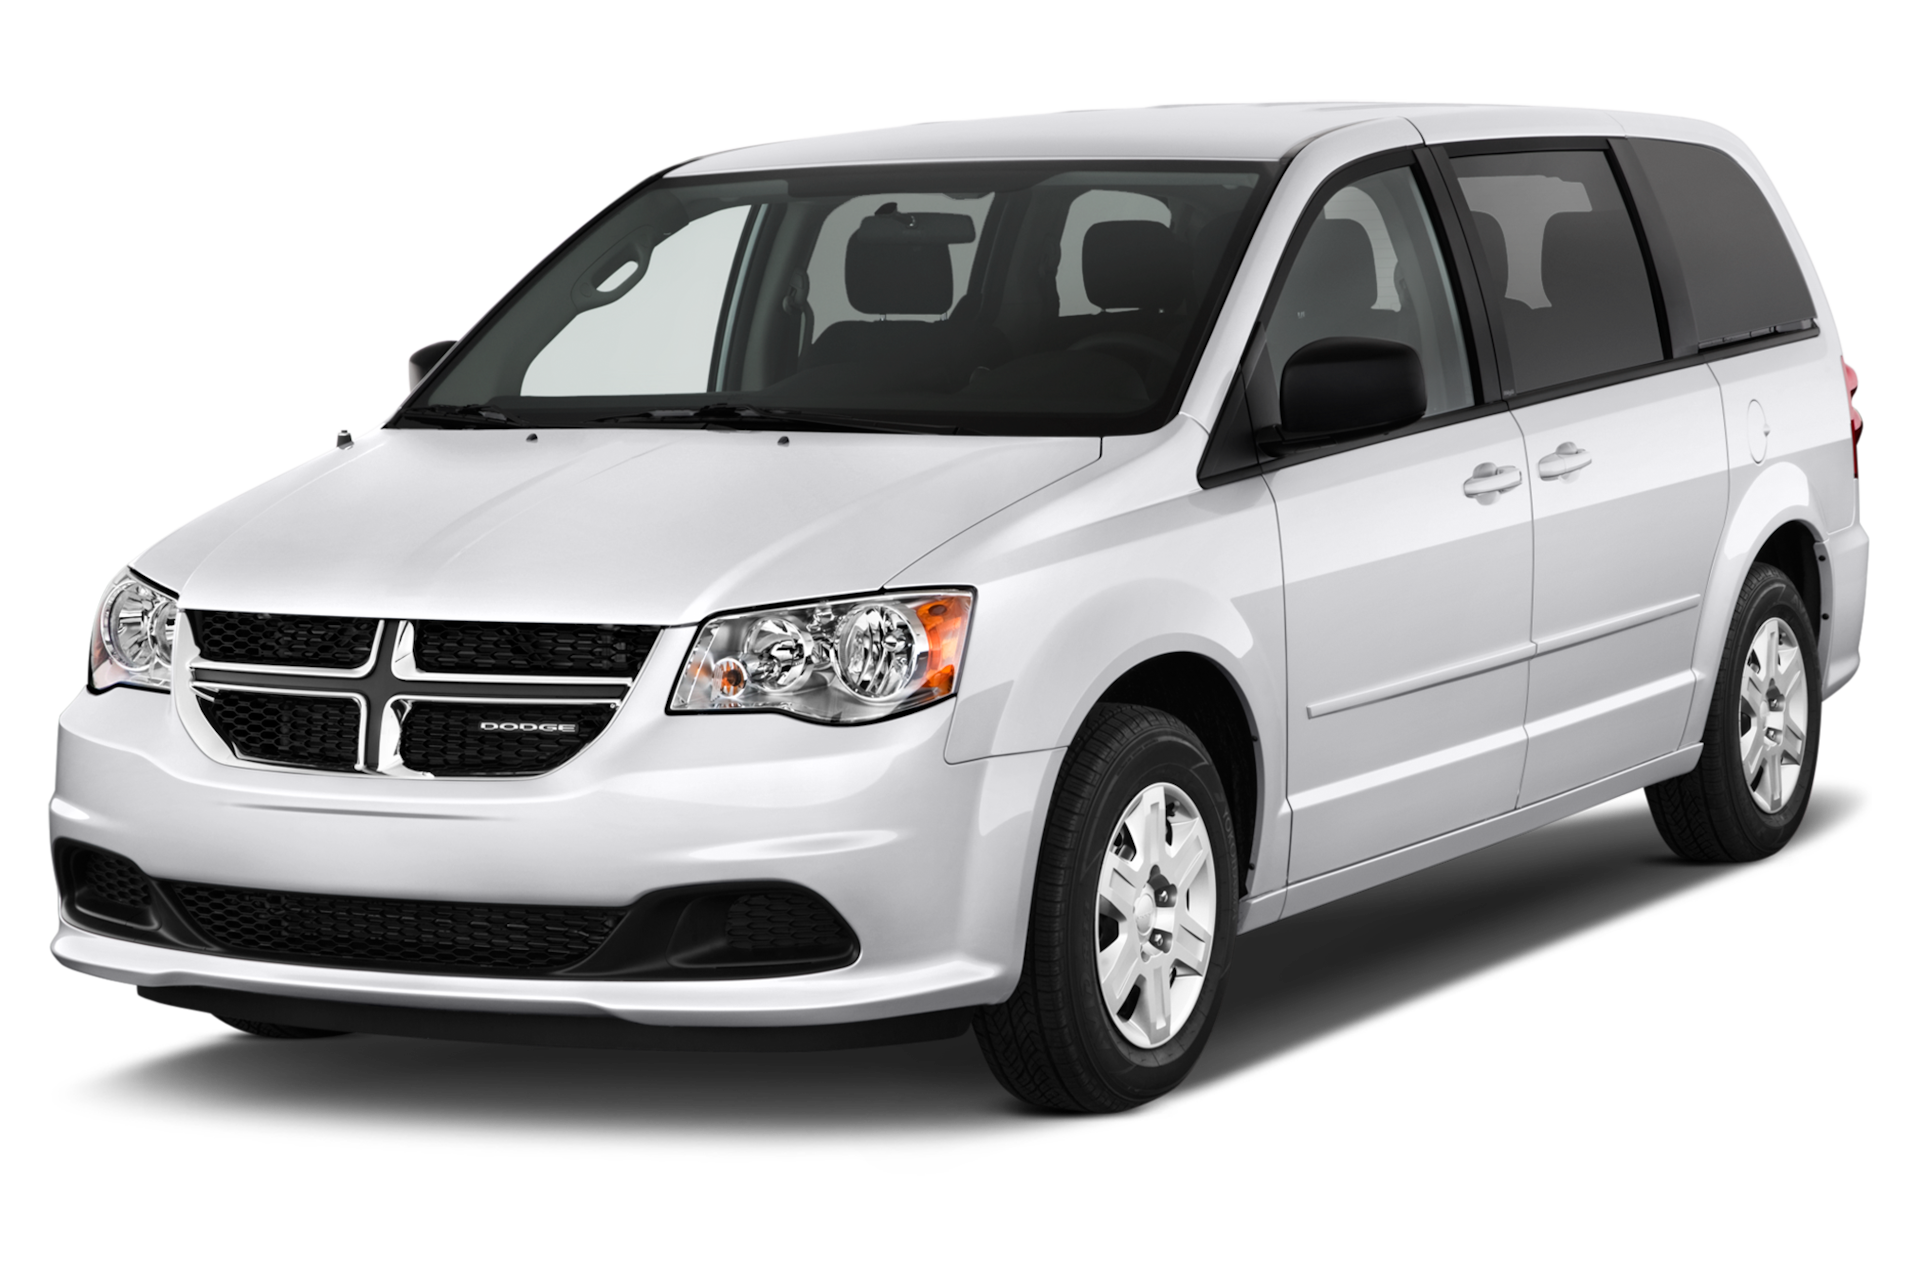 2012 Dodge Grand Caravan Prices, Reviews, and Photos - MotorTrend